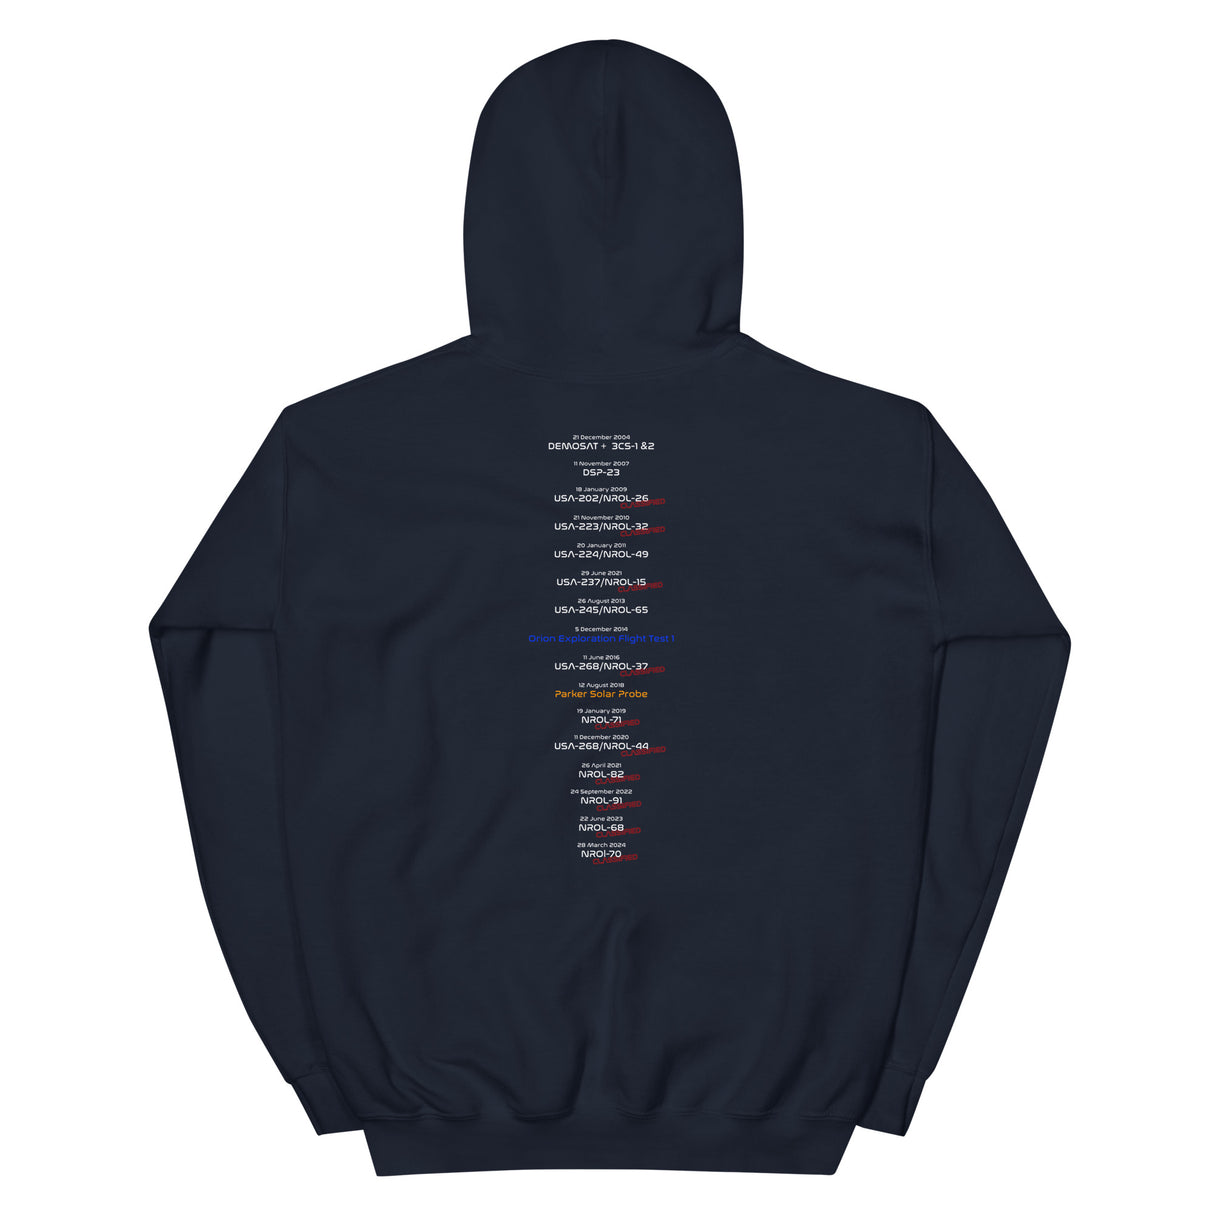 LIMITED! Delta IV Heavy Mission Complete Commemorative Hoodie